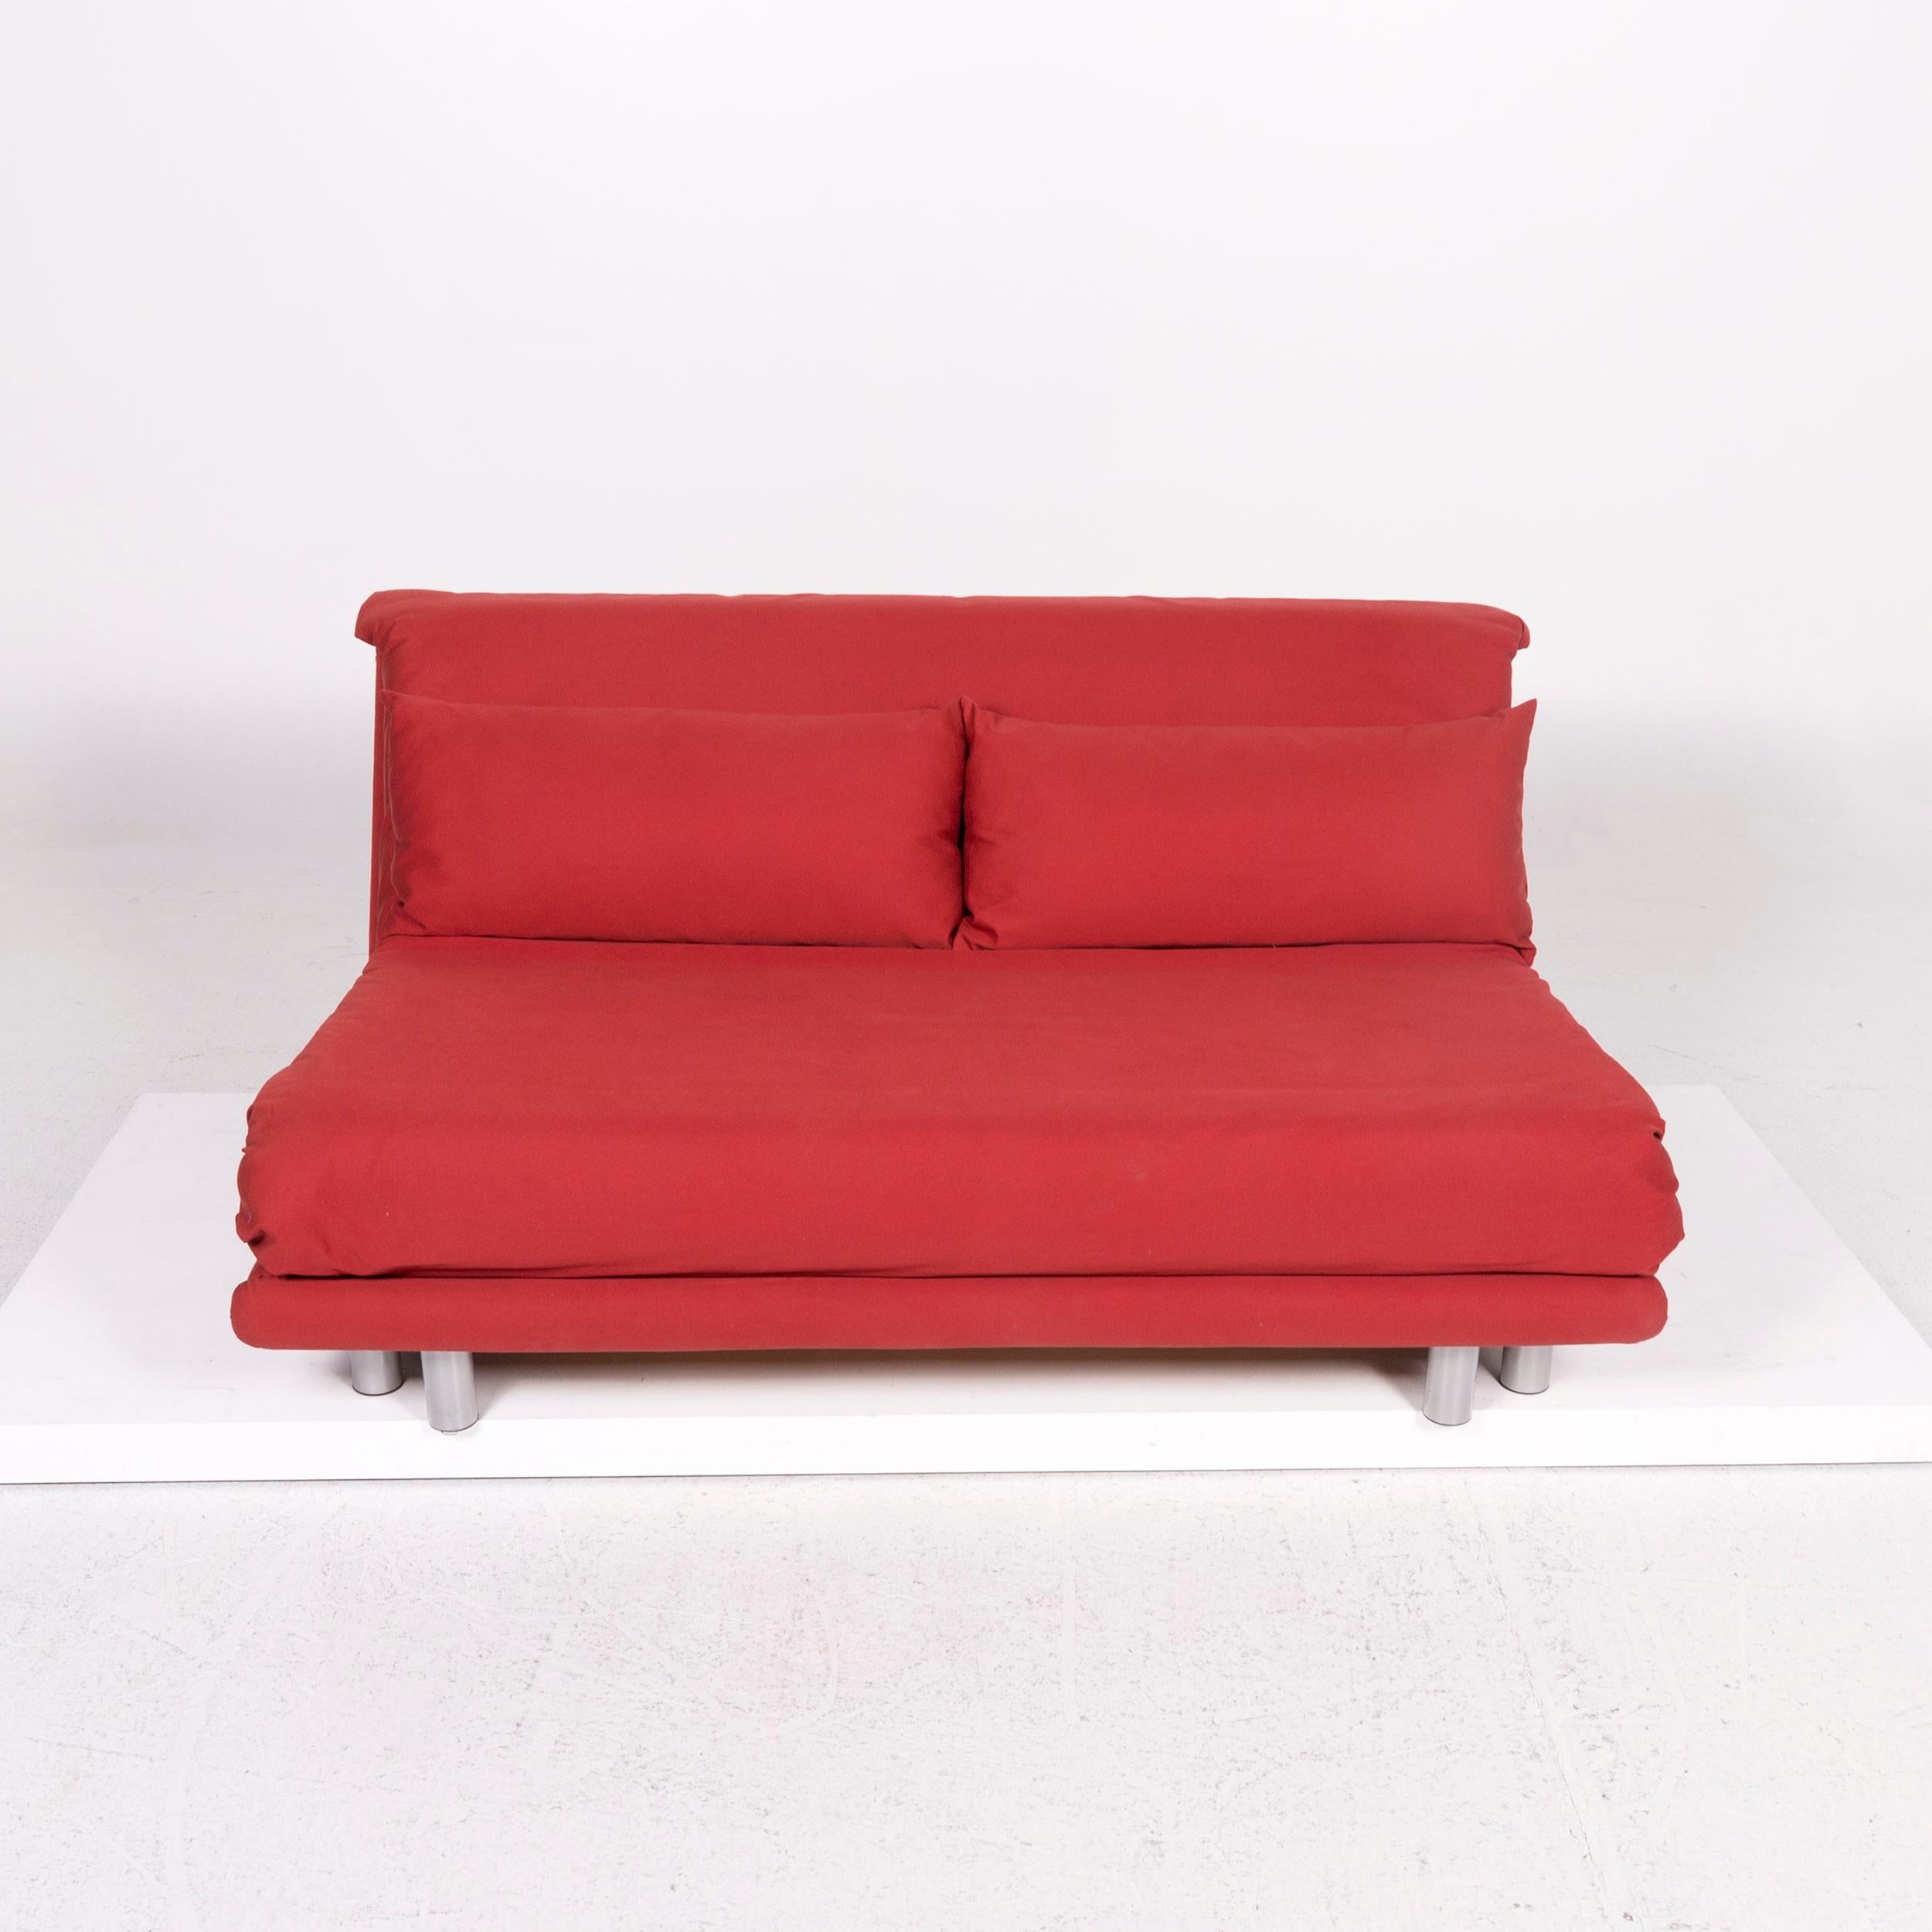 Ligne Roset Multy Fabric Sofa Bed Red Sofa Sleep Function Couch 1